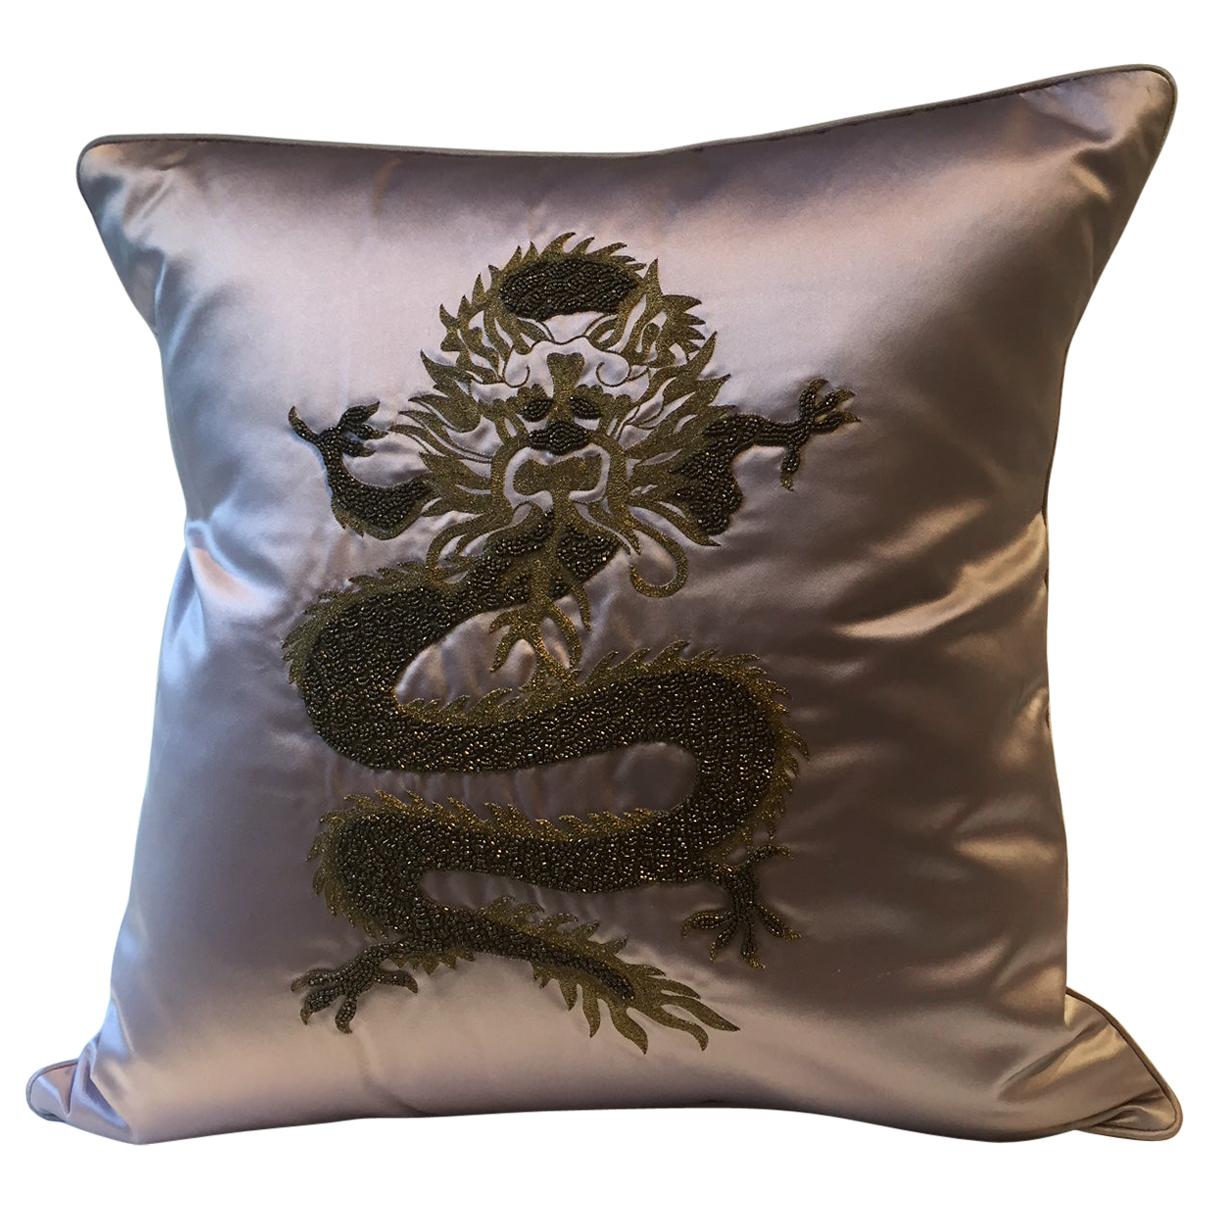 Decorative Cushion Silk Lilac with Dragon Design Hand Embroidery